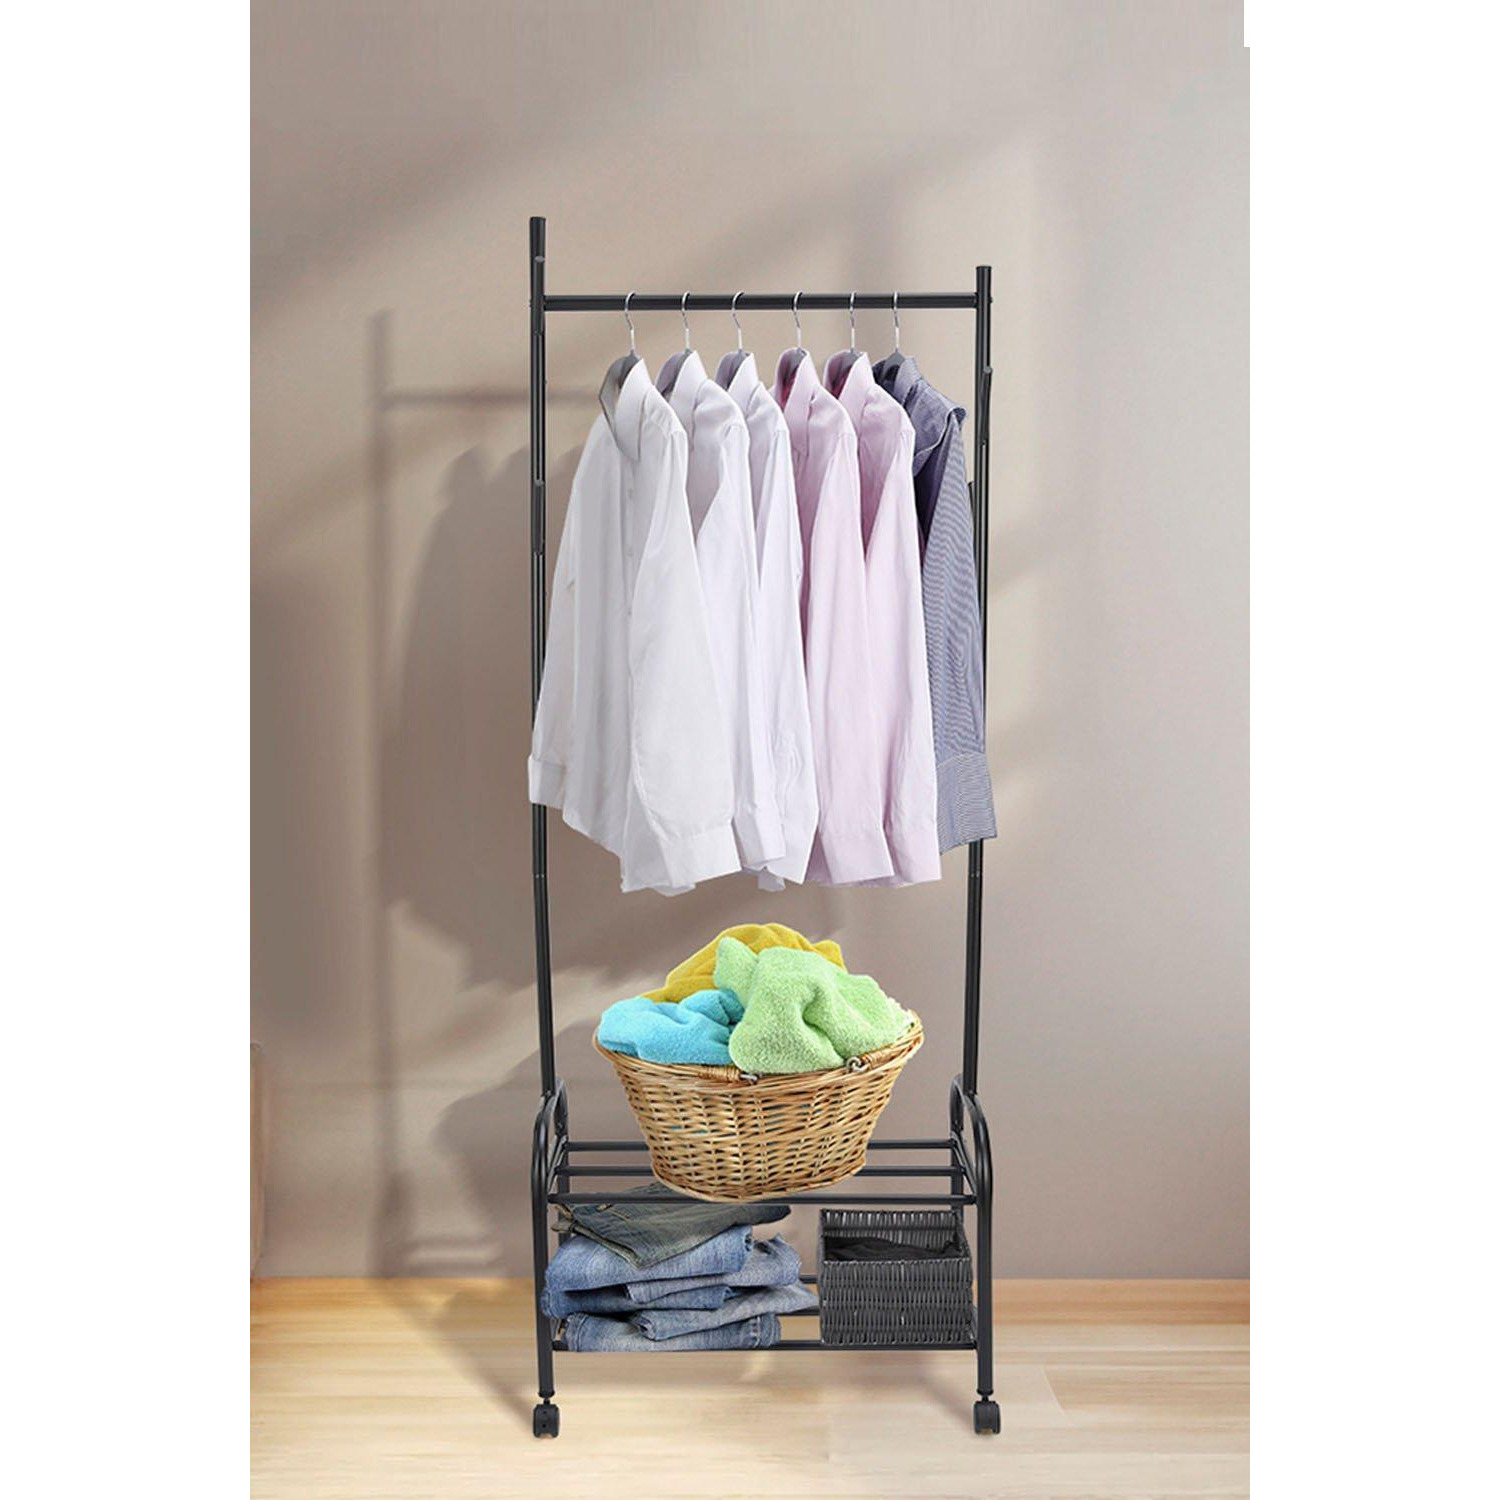 60cm Double Rail Clothes Rail Hanging Display Stand - image 1